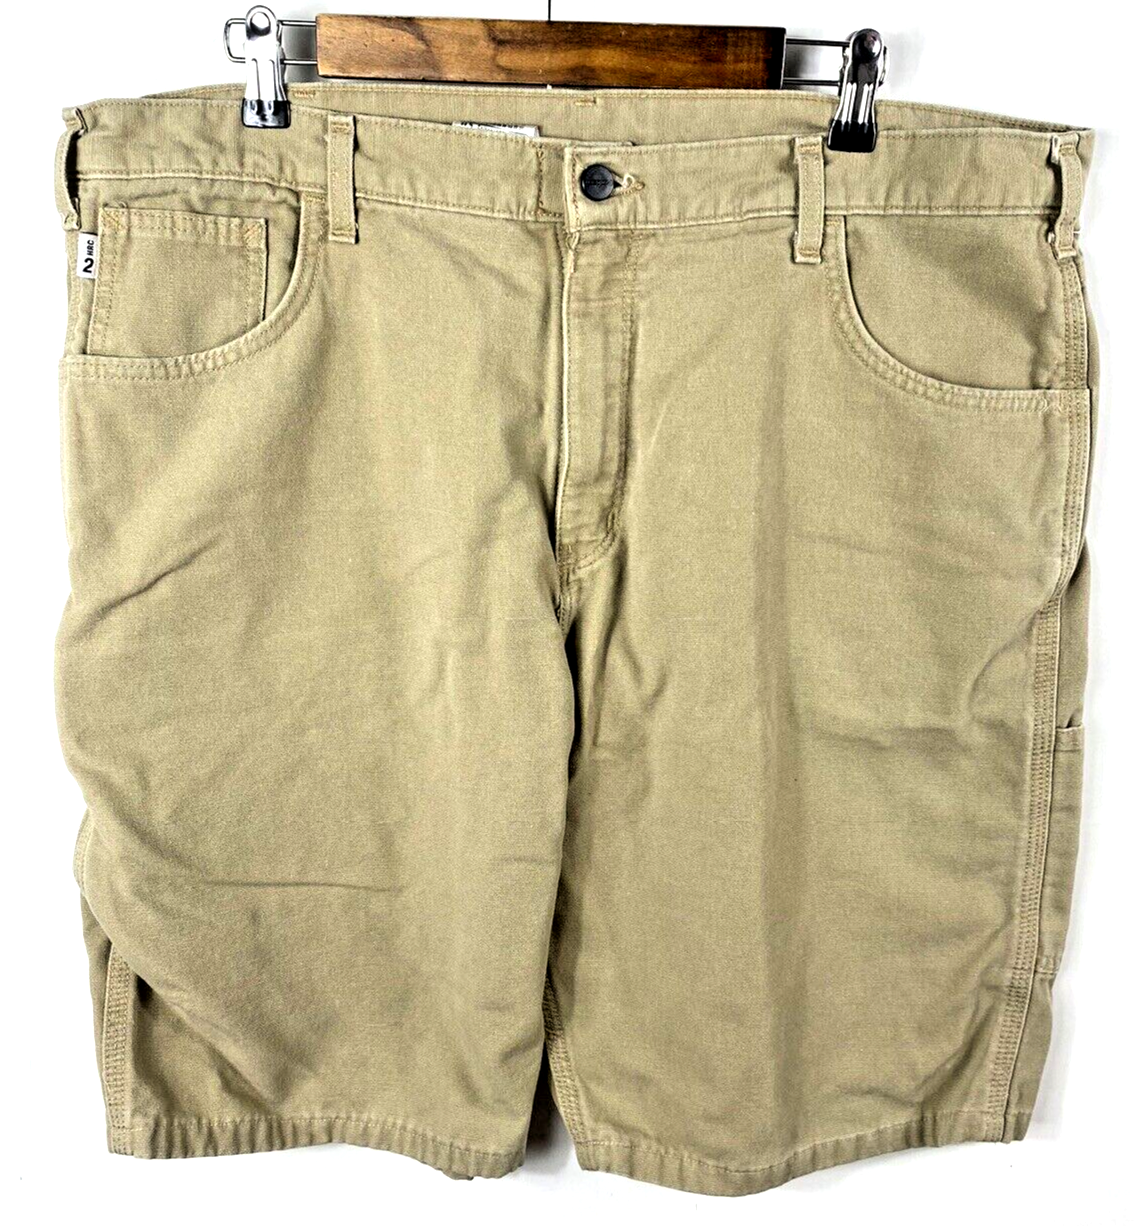 Primary image for Carhartt FR Shorts Size 40 Mens Flame Resistant Work Wear Loose Fit Tan 11" Insm